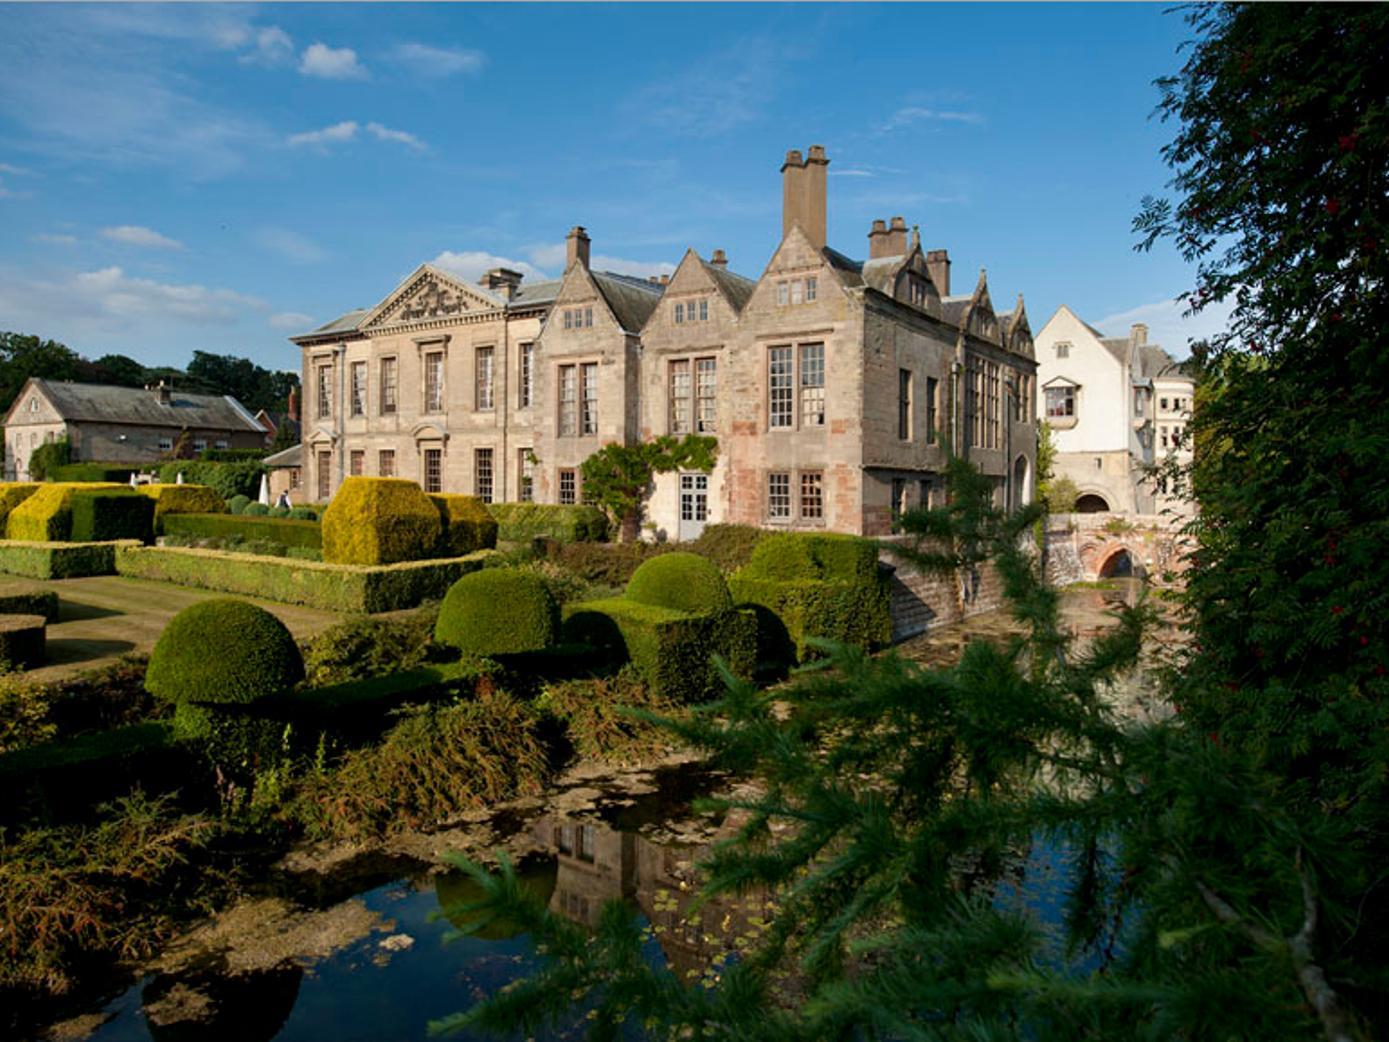 Coombe Abbey Hotel United Kingdom FAQ 2016, What facilities are there in Coombe Abbey Hotel United Kingdom 2016, What Languages Spoken are Supported in Coombe Abbey Hotel United Kingdom 2016, Which payment cards are accepted in Coombe Abbey Hotel United Kingdom , United Kingdom Coombe Abbey Hotel room facilities and services Q&A 2016, United Kingdom Coombe Abbey Hotel online booking services 2016, United Kingdom Coombe Abbey Hotel address 2016, United Kingdom Coombe Abbey Hotel telephone number 2016,United Kingdom Coombe Abbey Hotel map 2016, United Kingdom Coombe Abbey Hotel traffic guide 2016, how to go United Kingdom Coombe Abbey Hotel, United Kingdom Coombe Abbey Hotel booking online 2016, United Kingdom Coombe Abbey Hotel room types 2016.